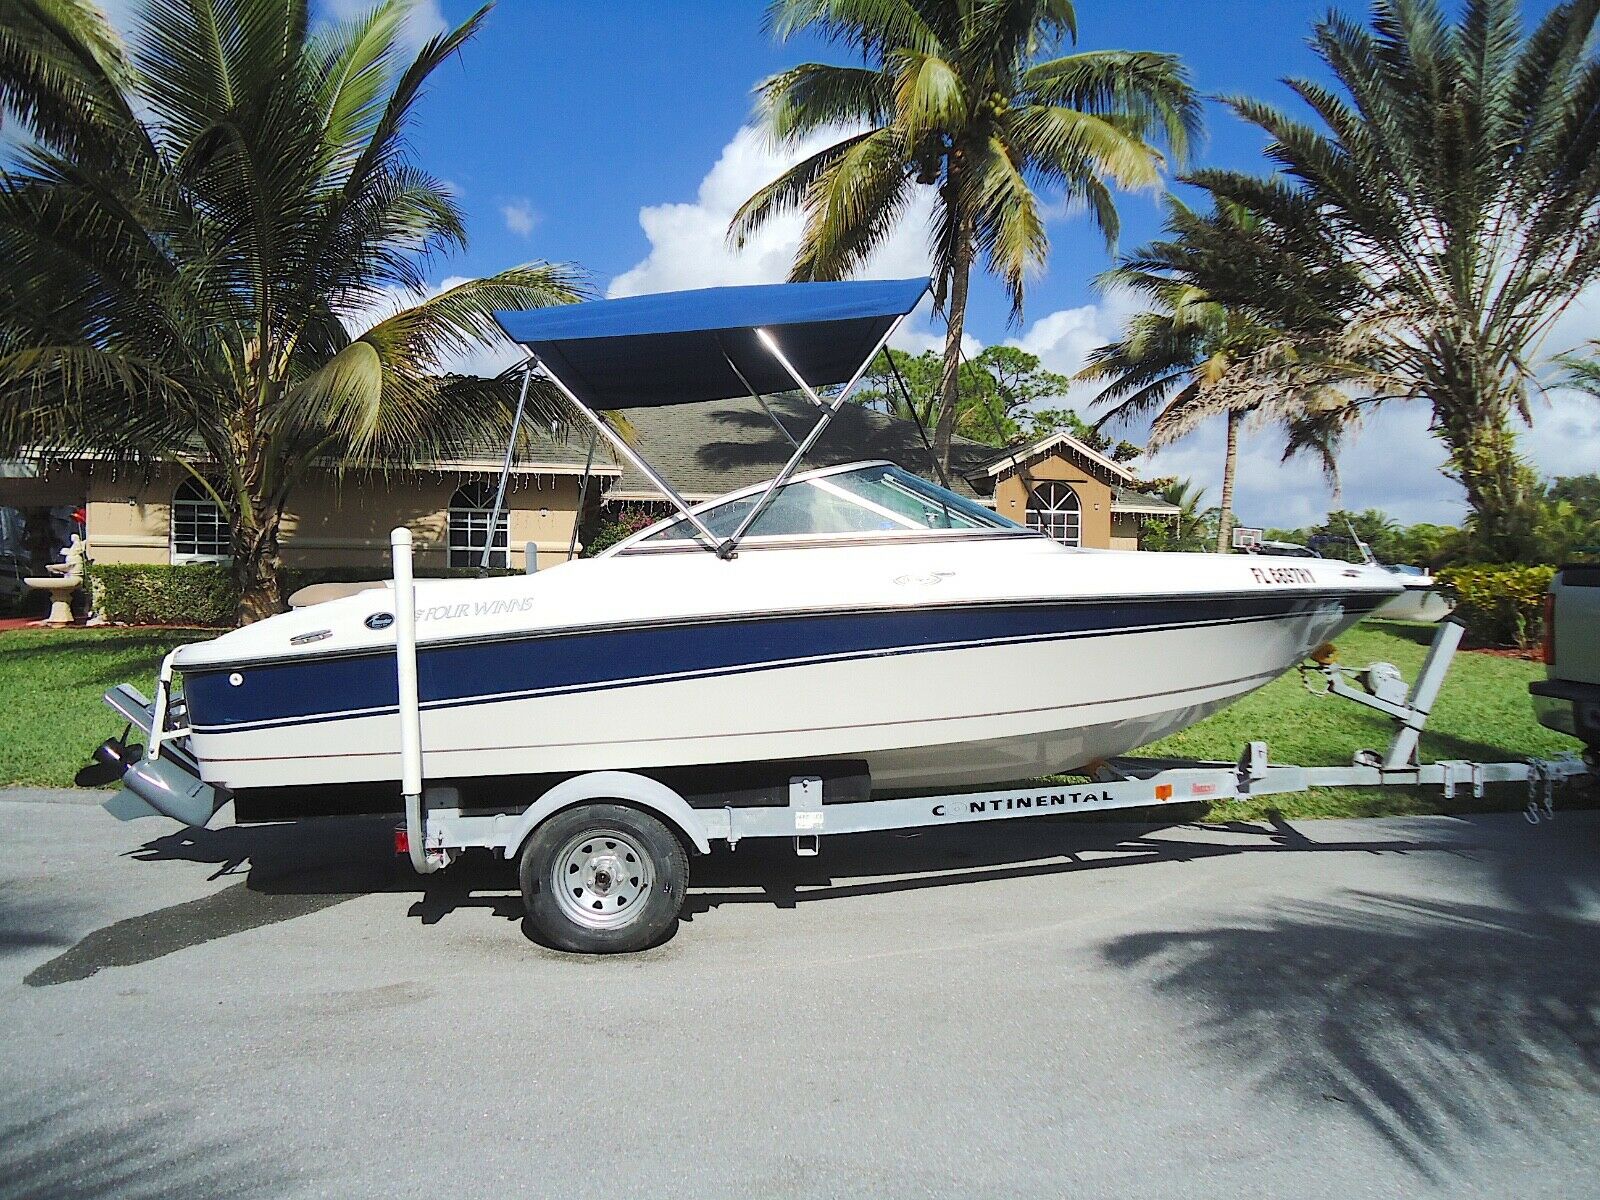 Four Winns 180 Horizon 2007 For Sale For 7800 Boats From